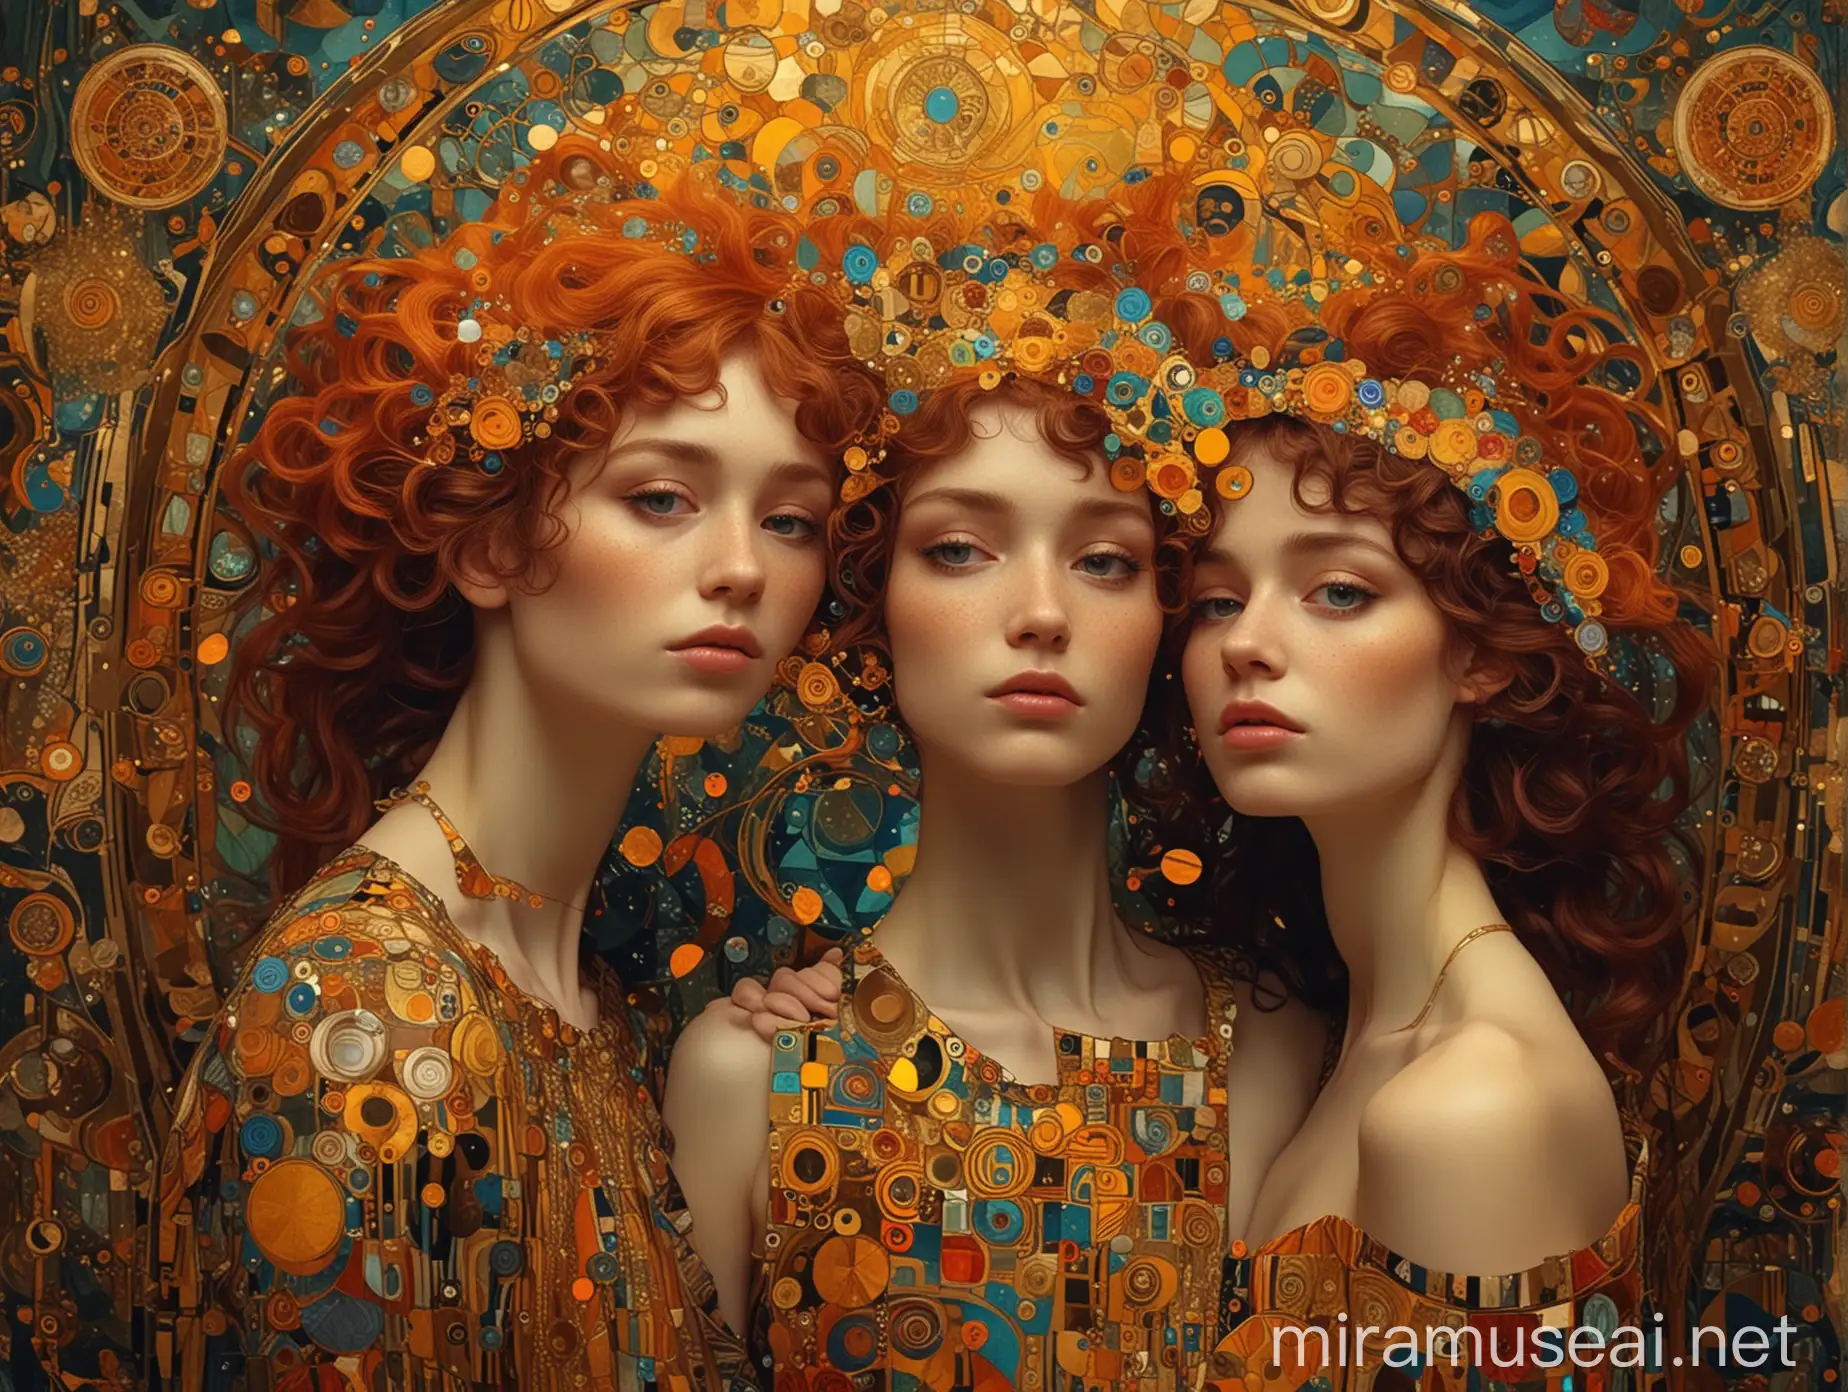 Trippy Gustav Klimt Inspired Art Nouveau Depiction with Vibrant Colors and Sacred Geometry Fractals